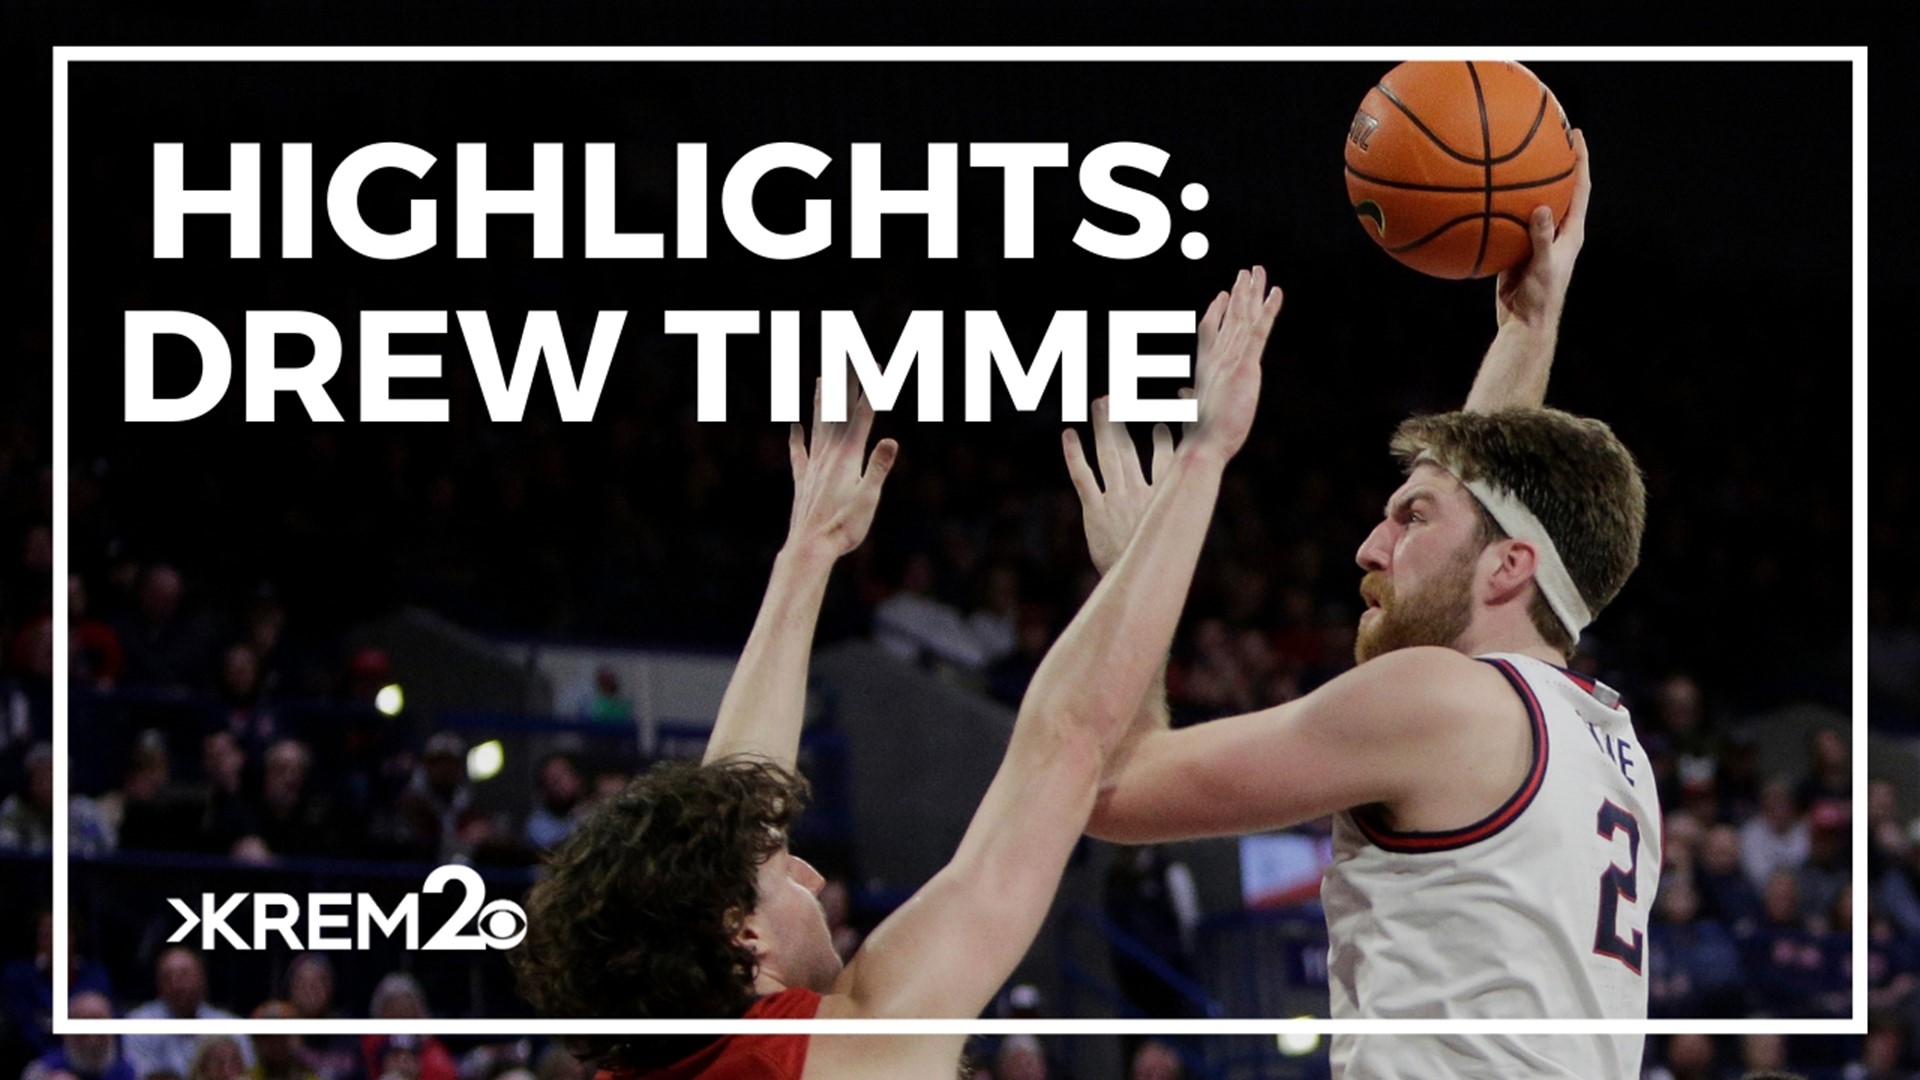 With Gonzaga Bulldog Drew Timme playing in the Kennel one last time, KREM 2 looked back on some of his best highlights.